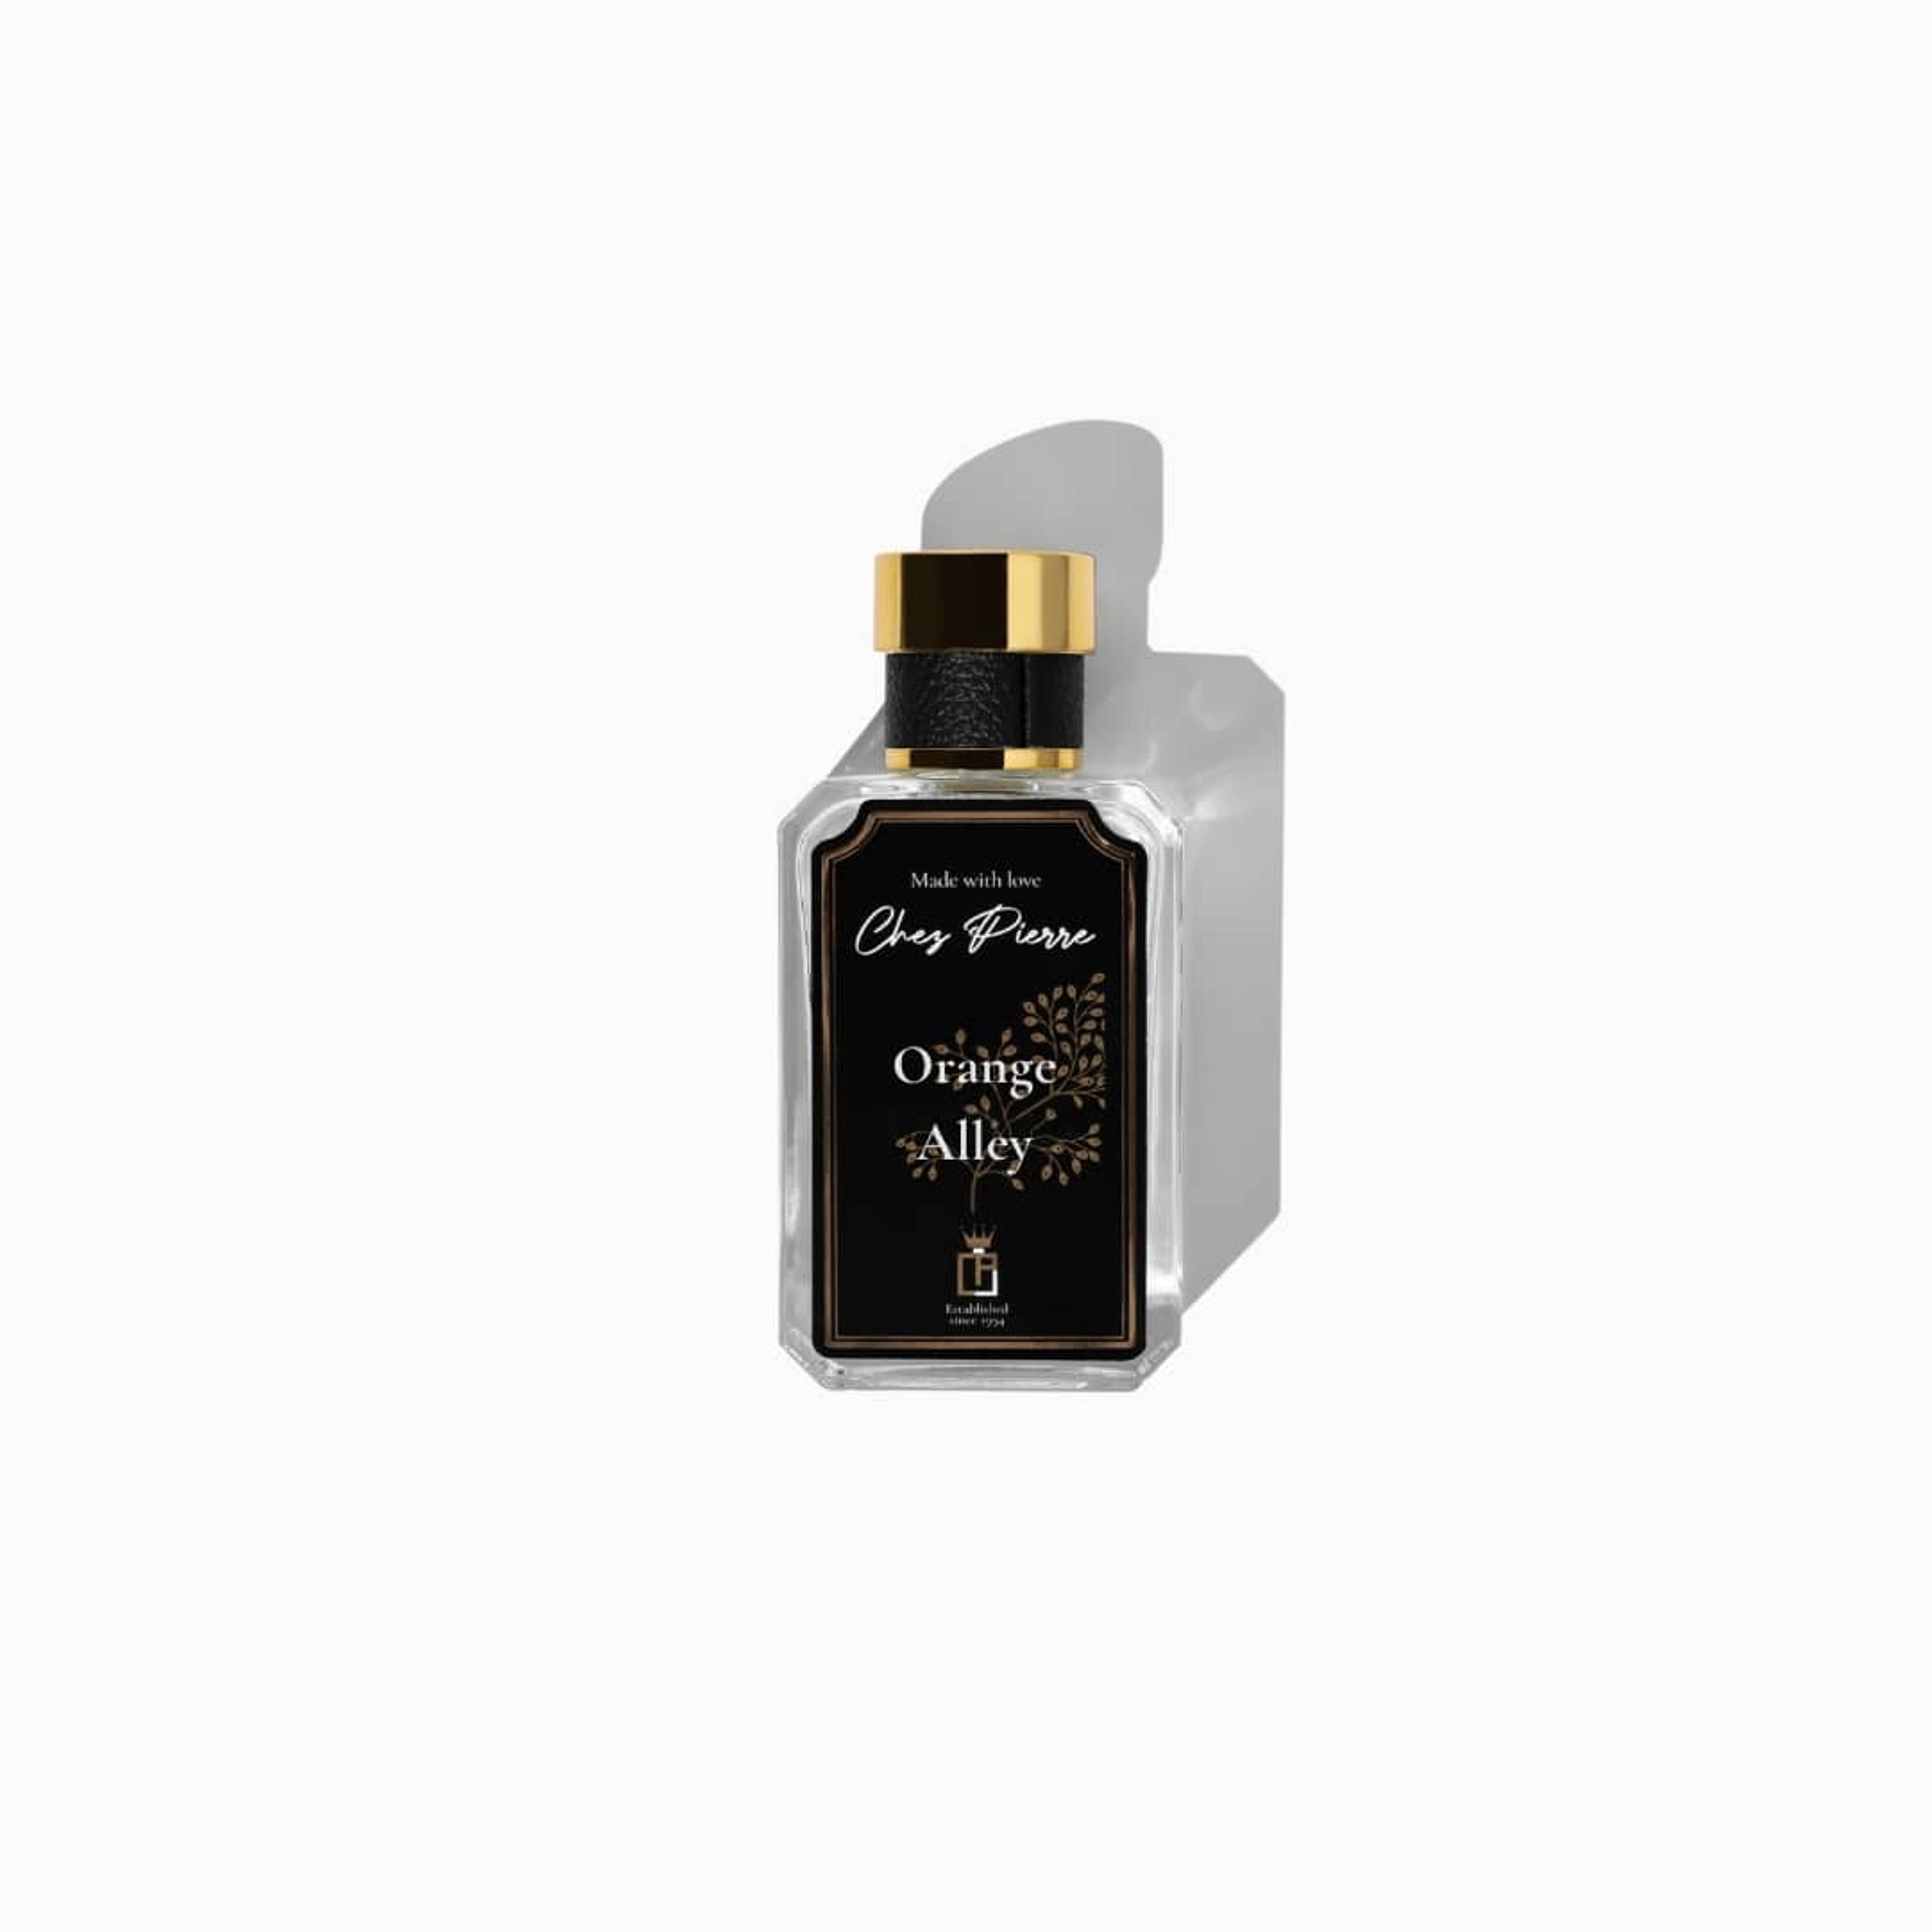 Chez Pierre's Orange Alley Perfume Inspired By Tom Ford Soleil Neige